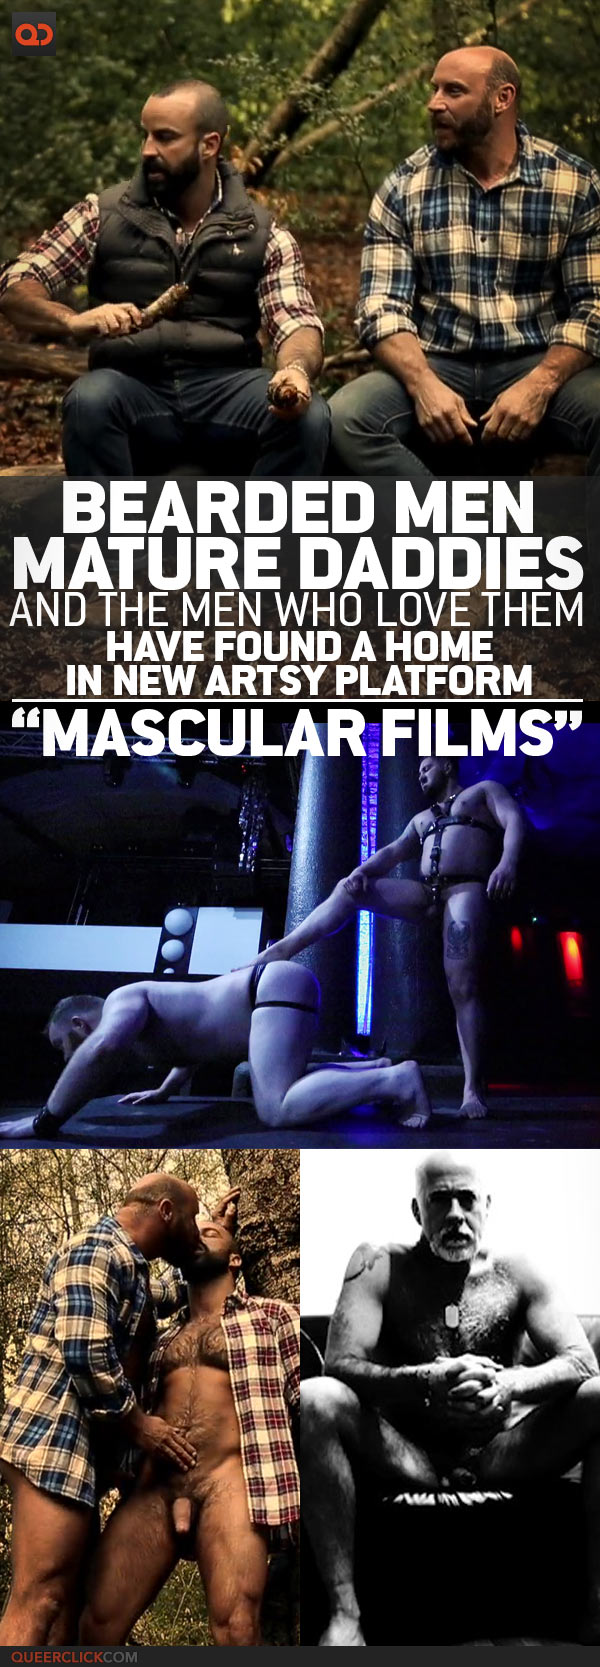 Bearded Men, Mature Daddies And The Men Who Love Them Have Found A Home In New Artsy Platform, “Mascular Films”!